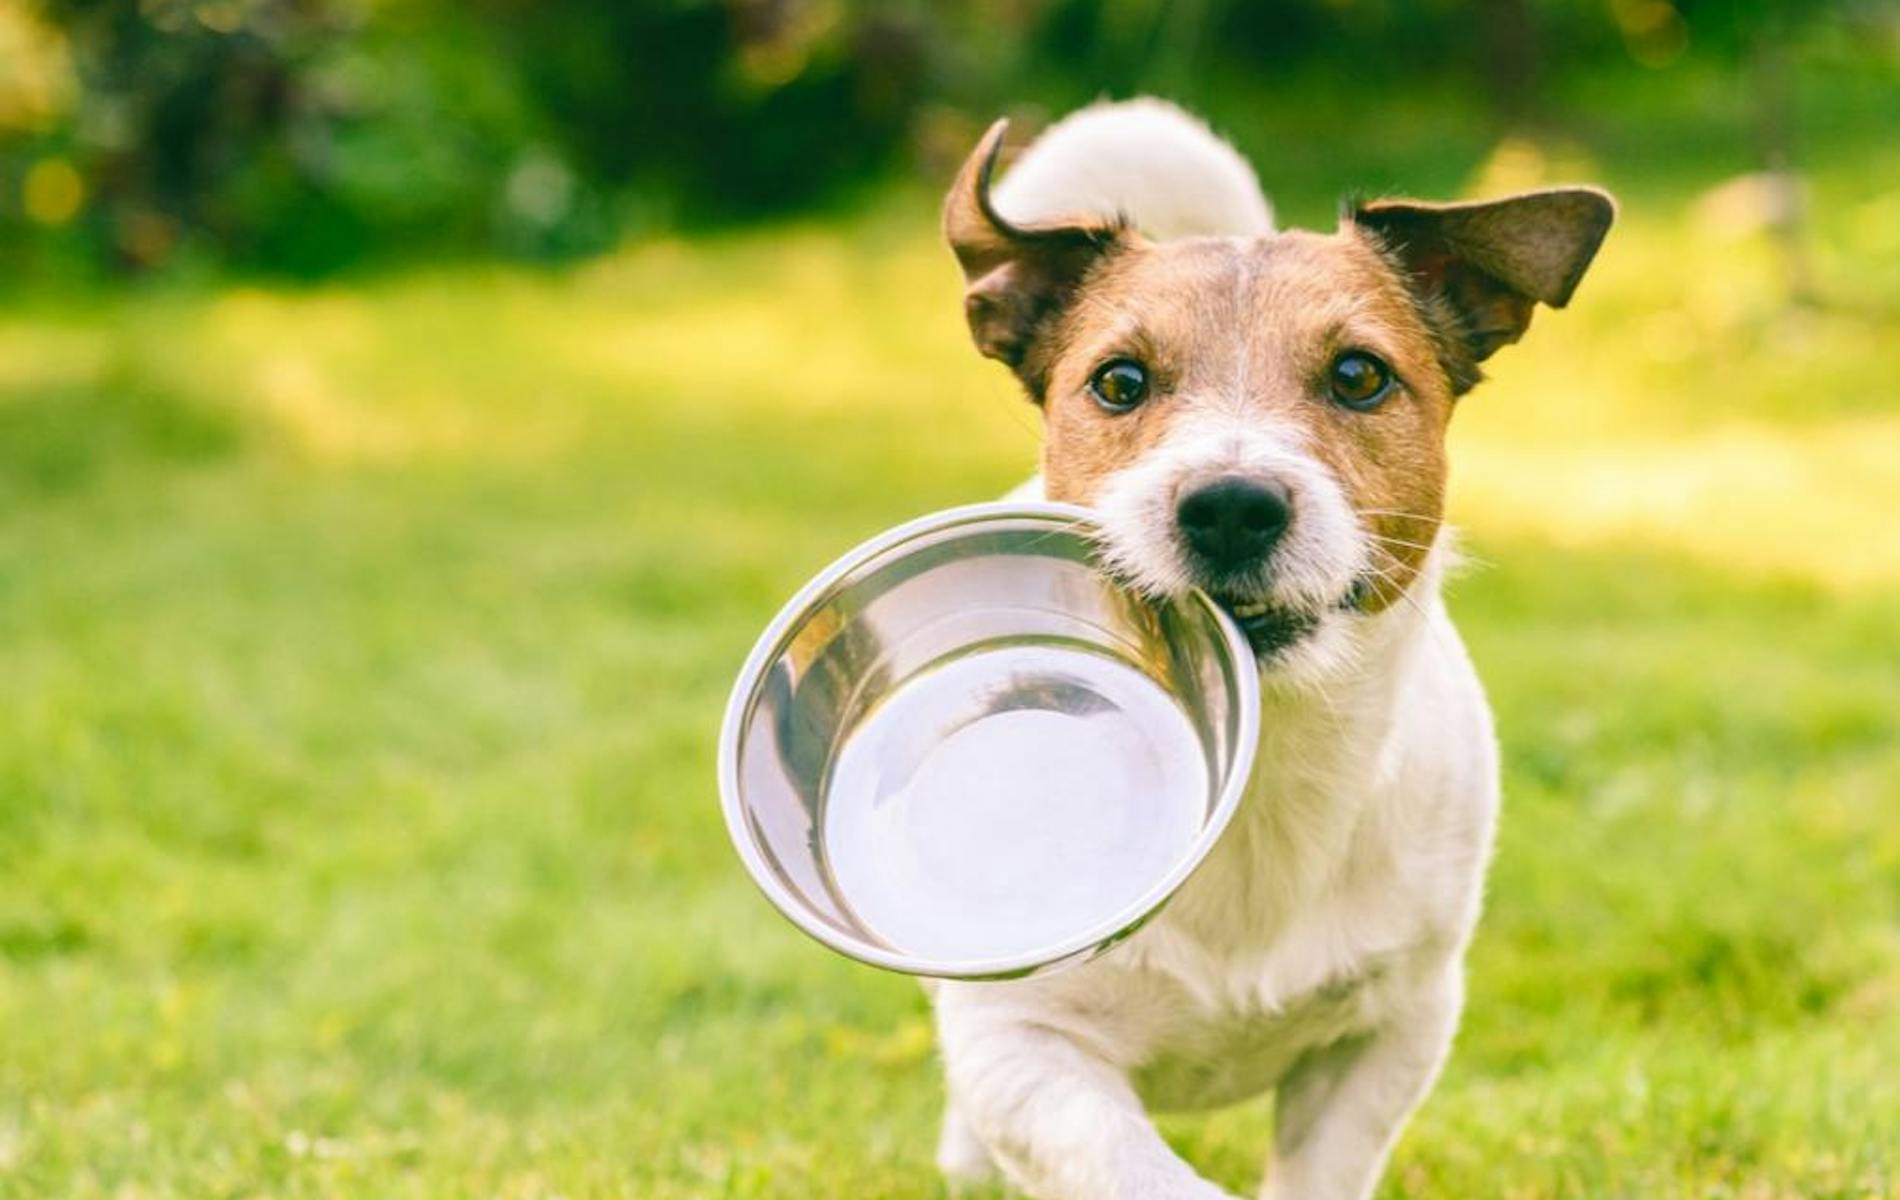 Dog with empty food bowl in mouth